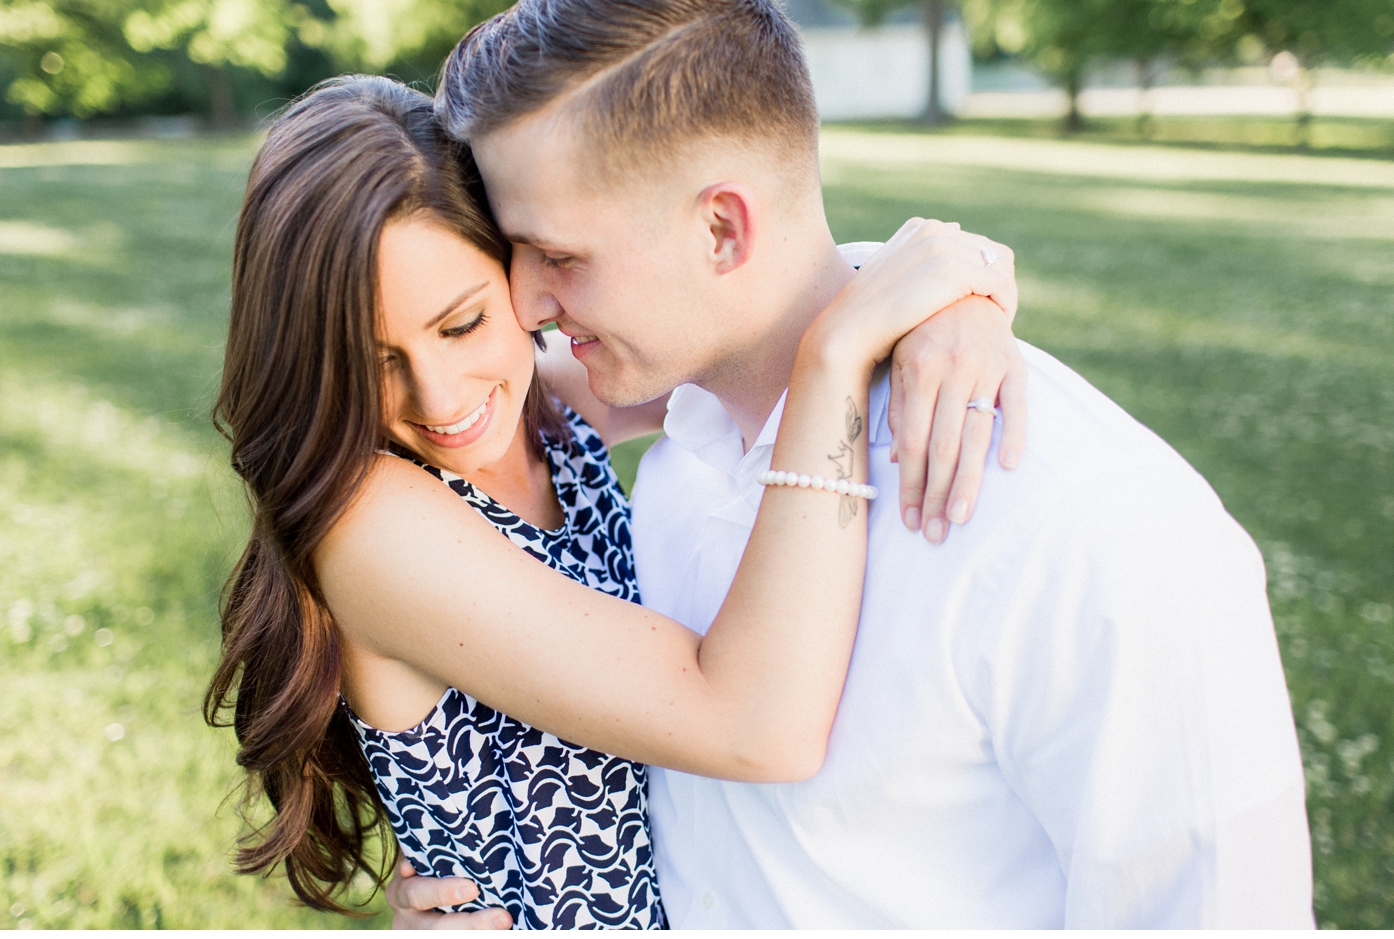 Richmond Virginia Engagement Session at Crump Park by Alisandra Photography